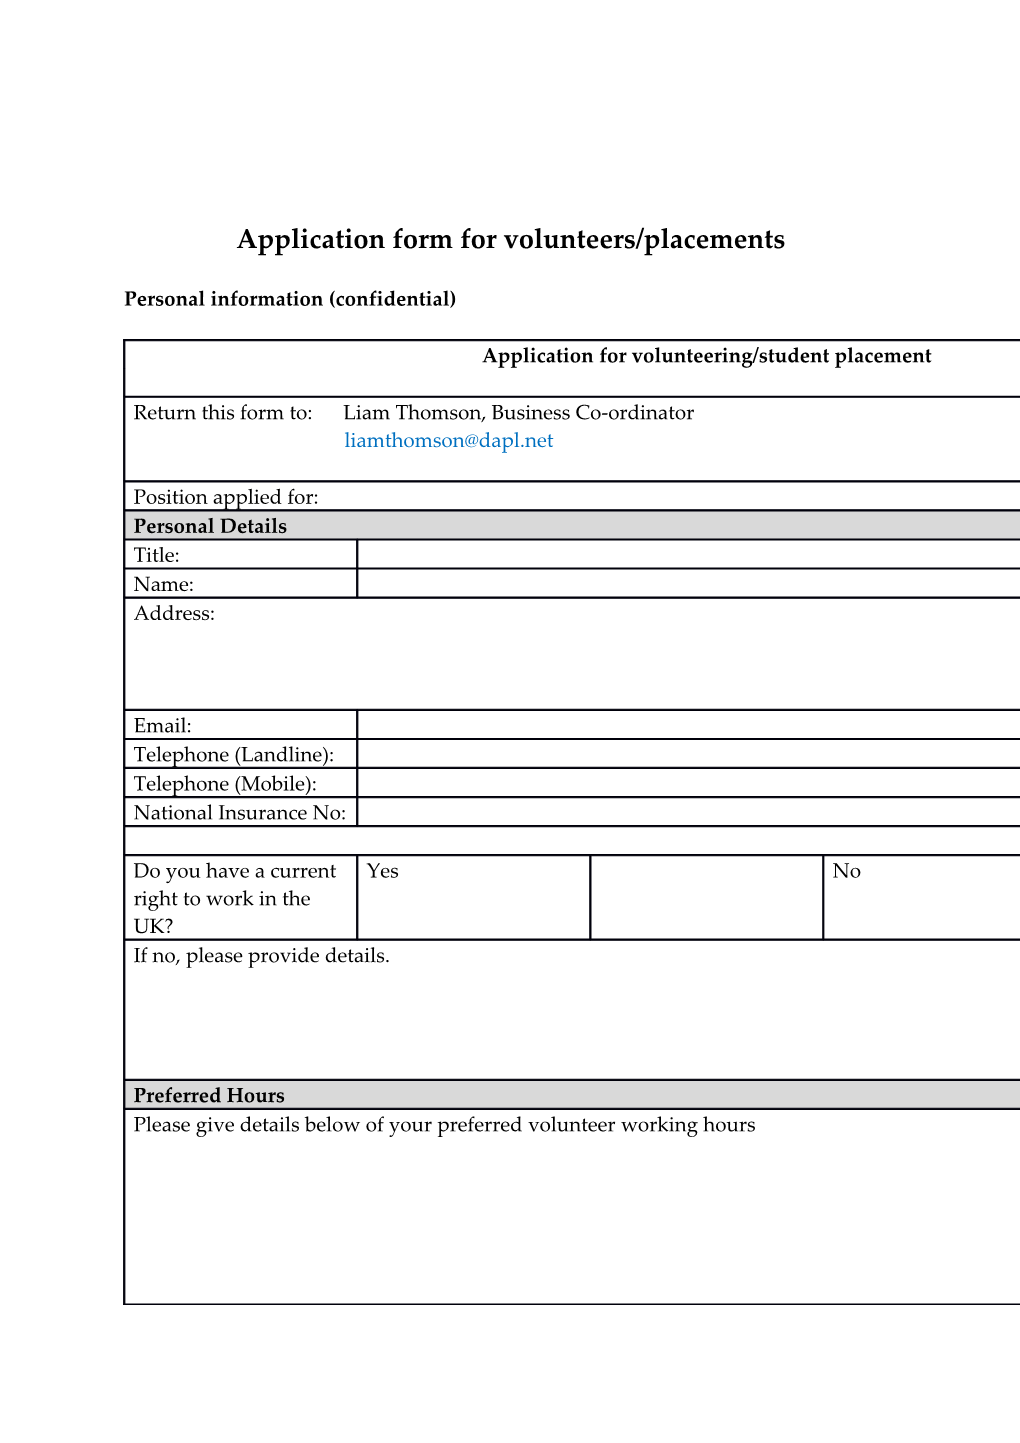 Application Form for Volunteers/Placements